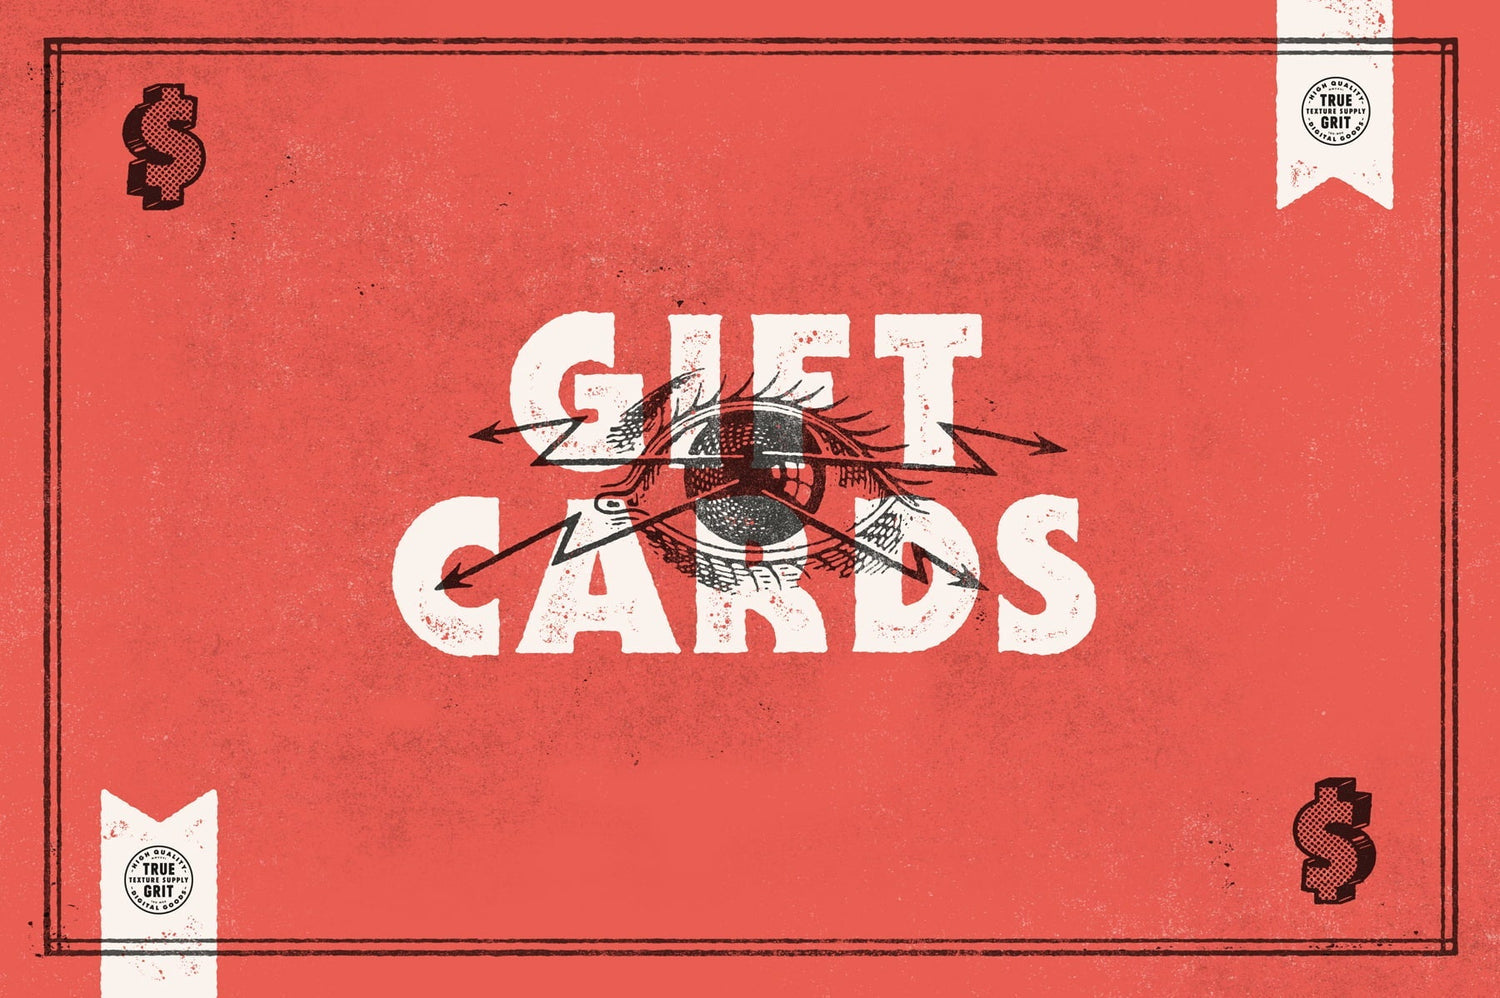 GiftCards Cover 2019 eb839b80 f9fc 4630 b47b